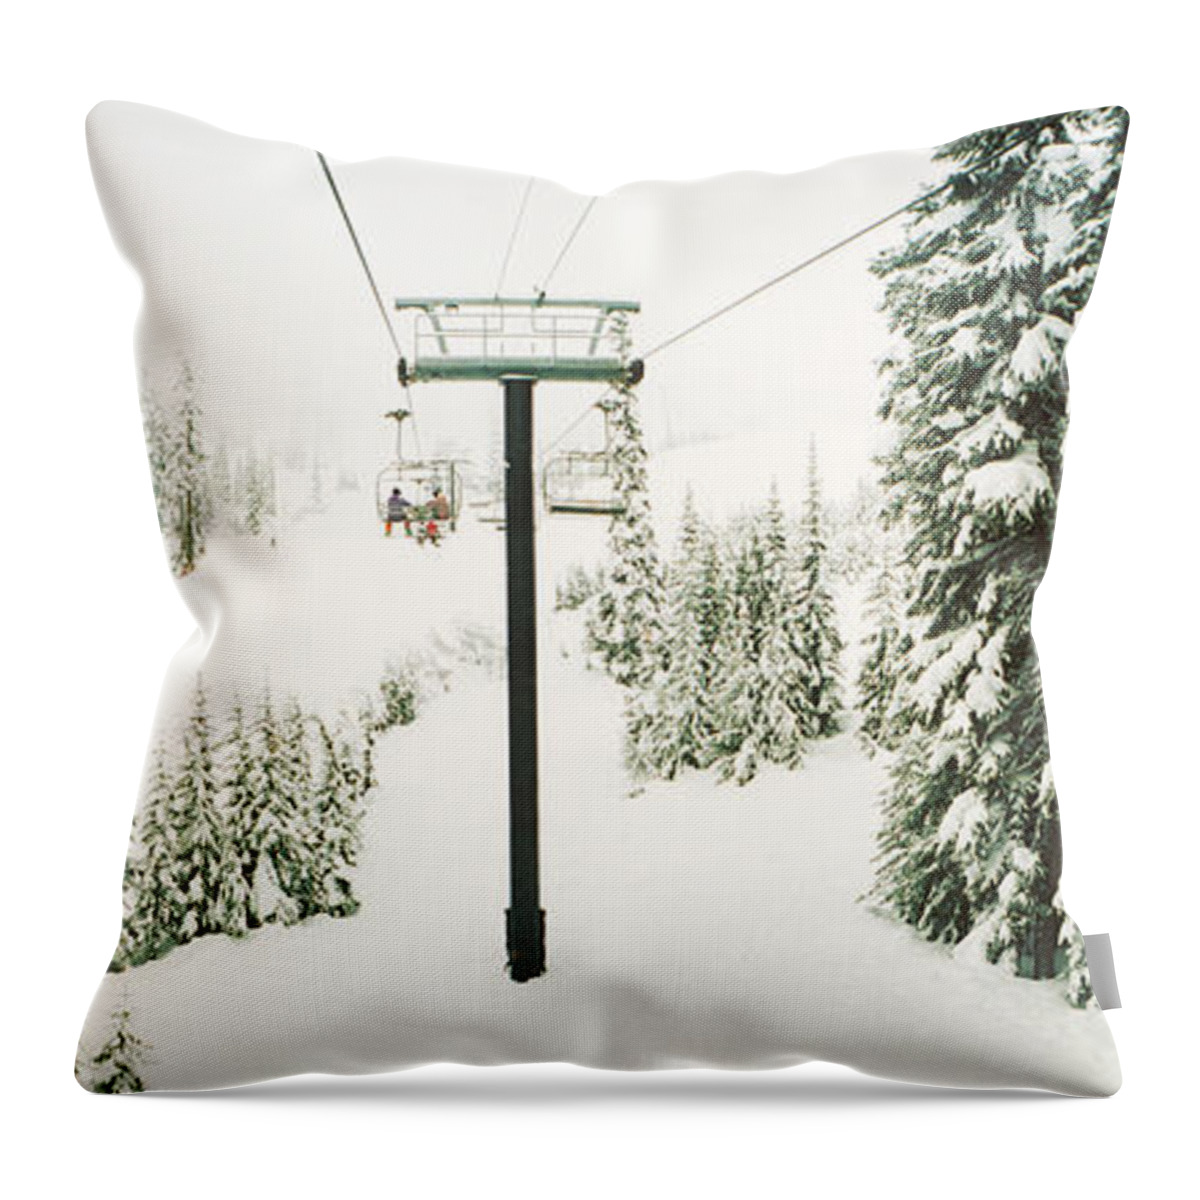 Photography Throw Pillow featuring the photograph Chair Lift And Snowy Evergreen Trees by Panoramic Images